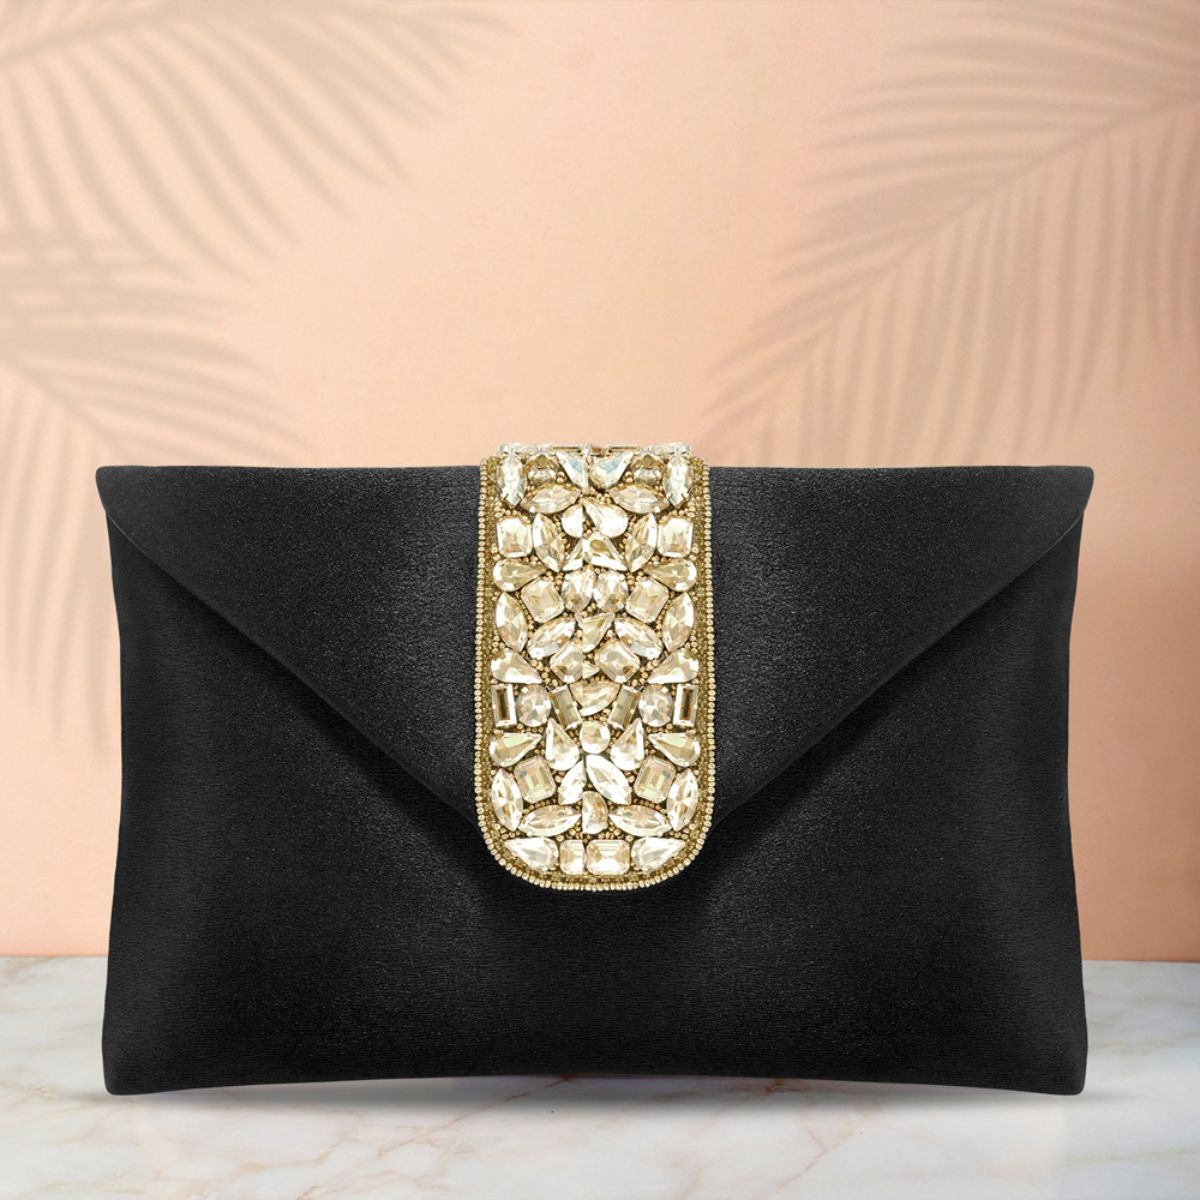 Buy Black Glitter Clutch Online In India - Etsy India